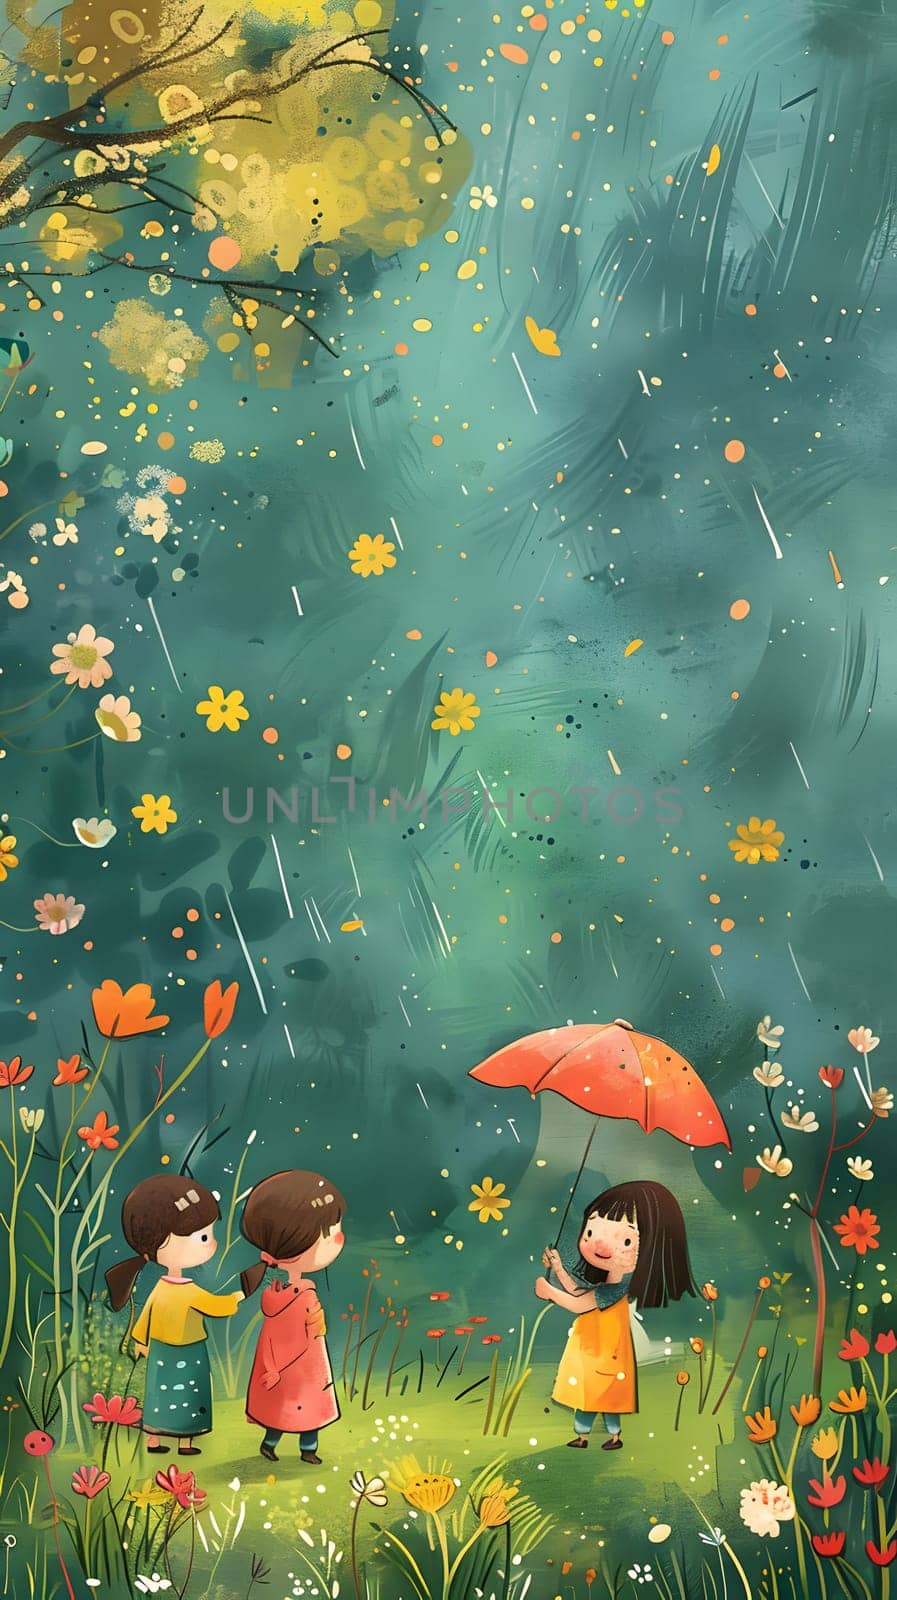 Three girls with umbrella in rainy natural environment by Nadtochiy